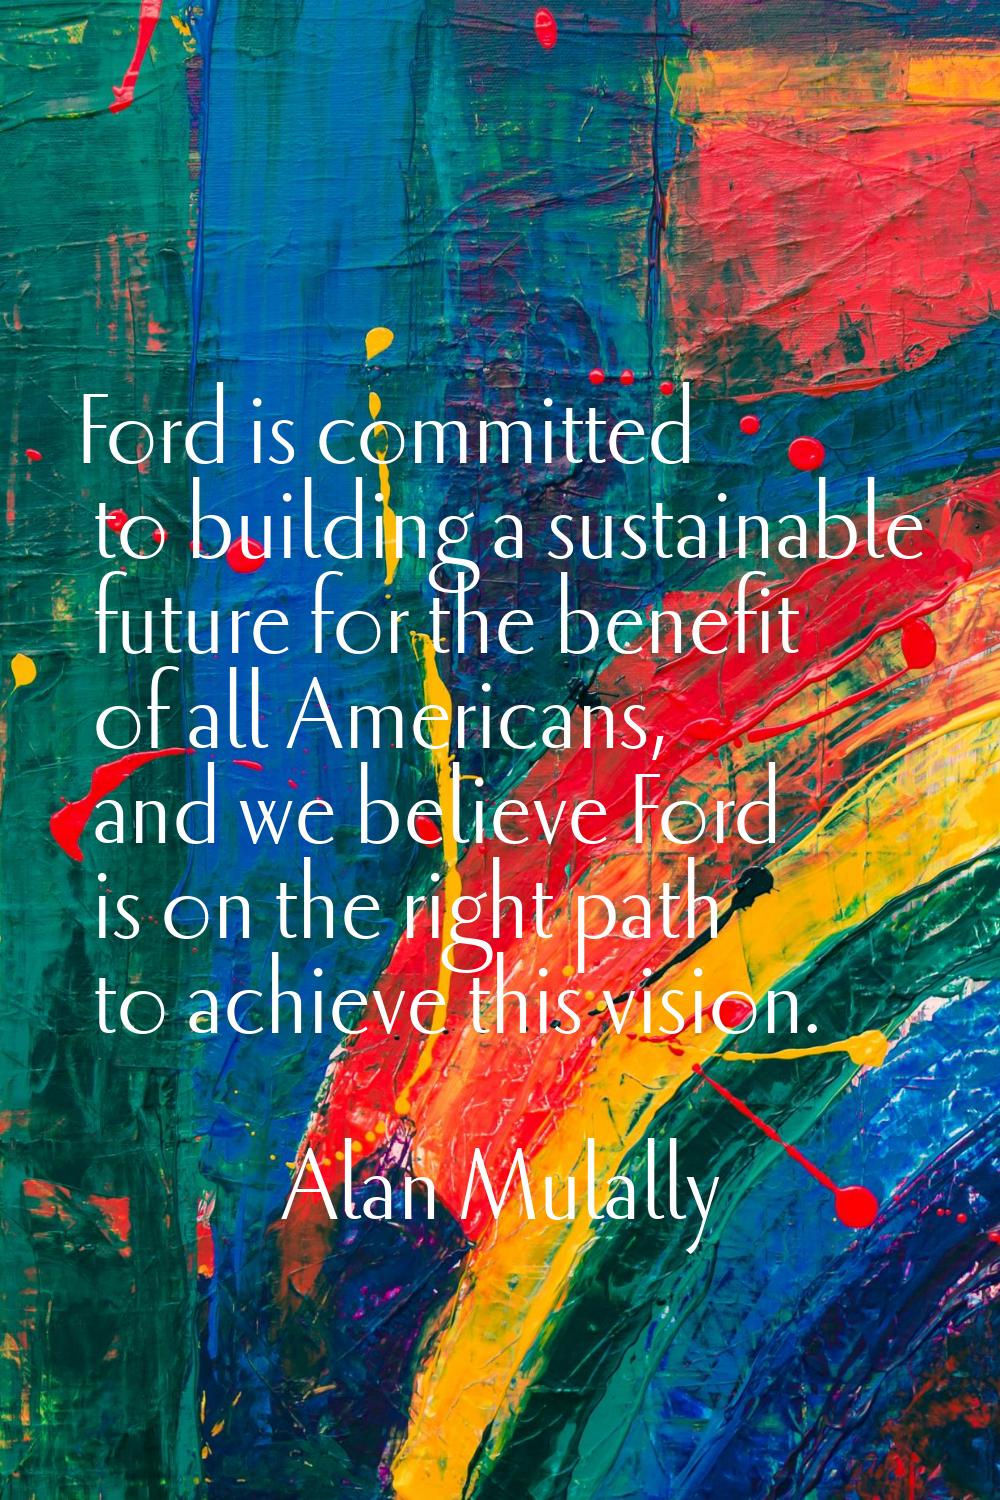 Ford is committed to building a sustainable future for the benefit of all Americans, and we believe